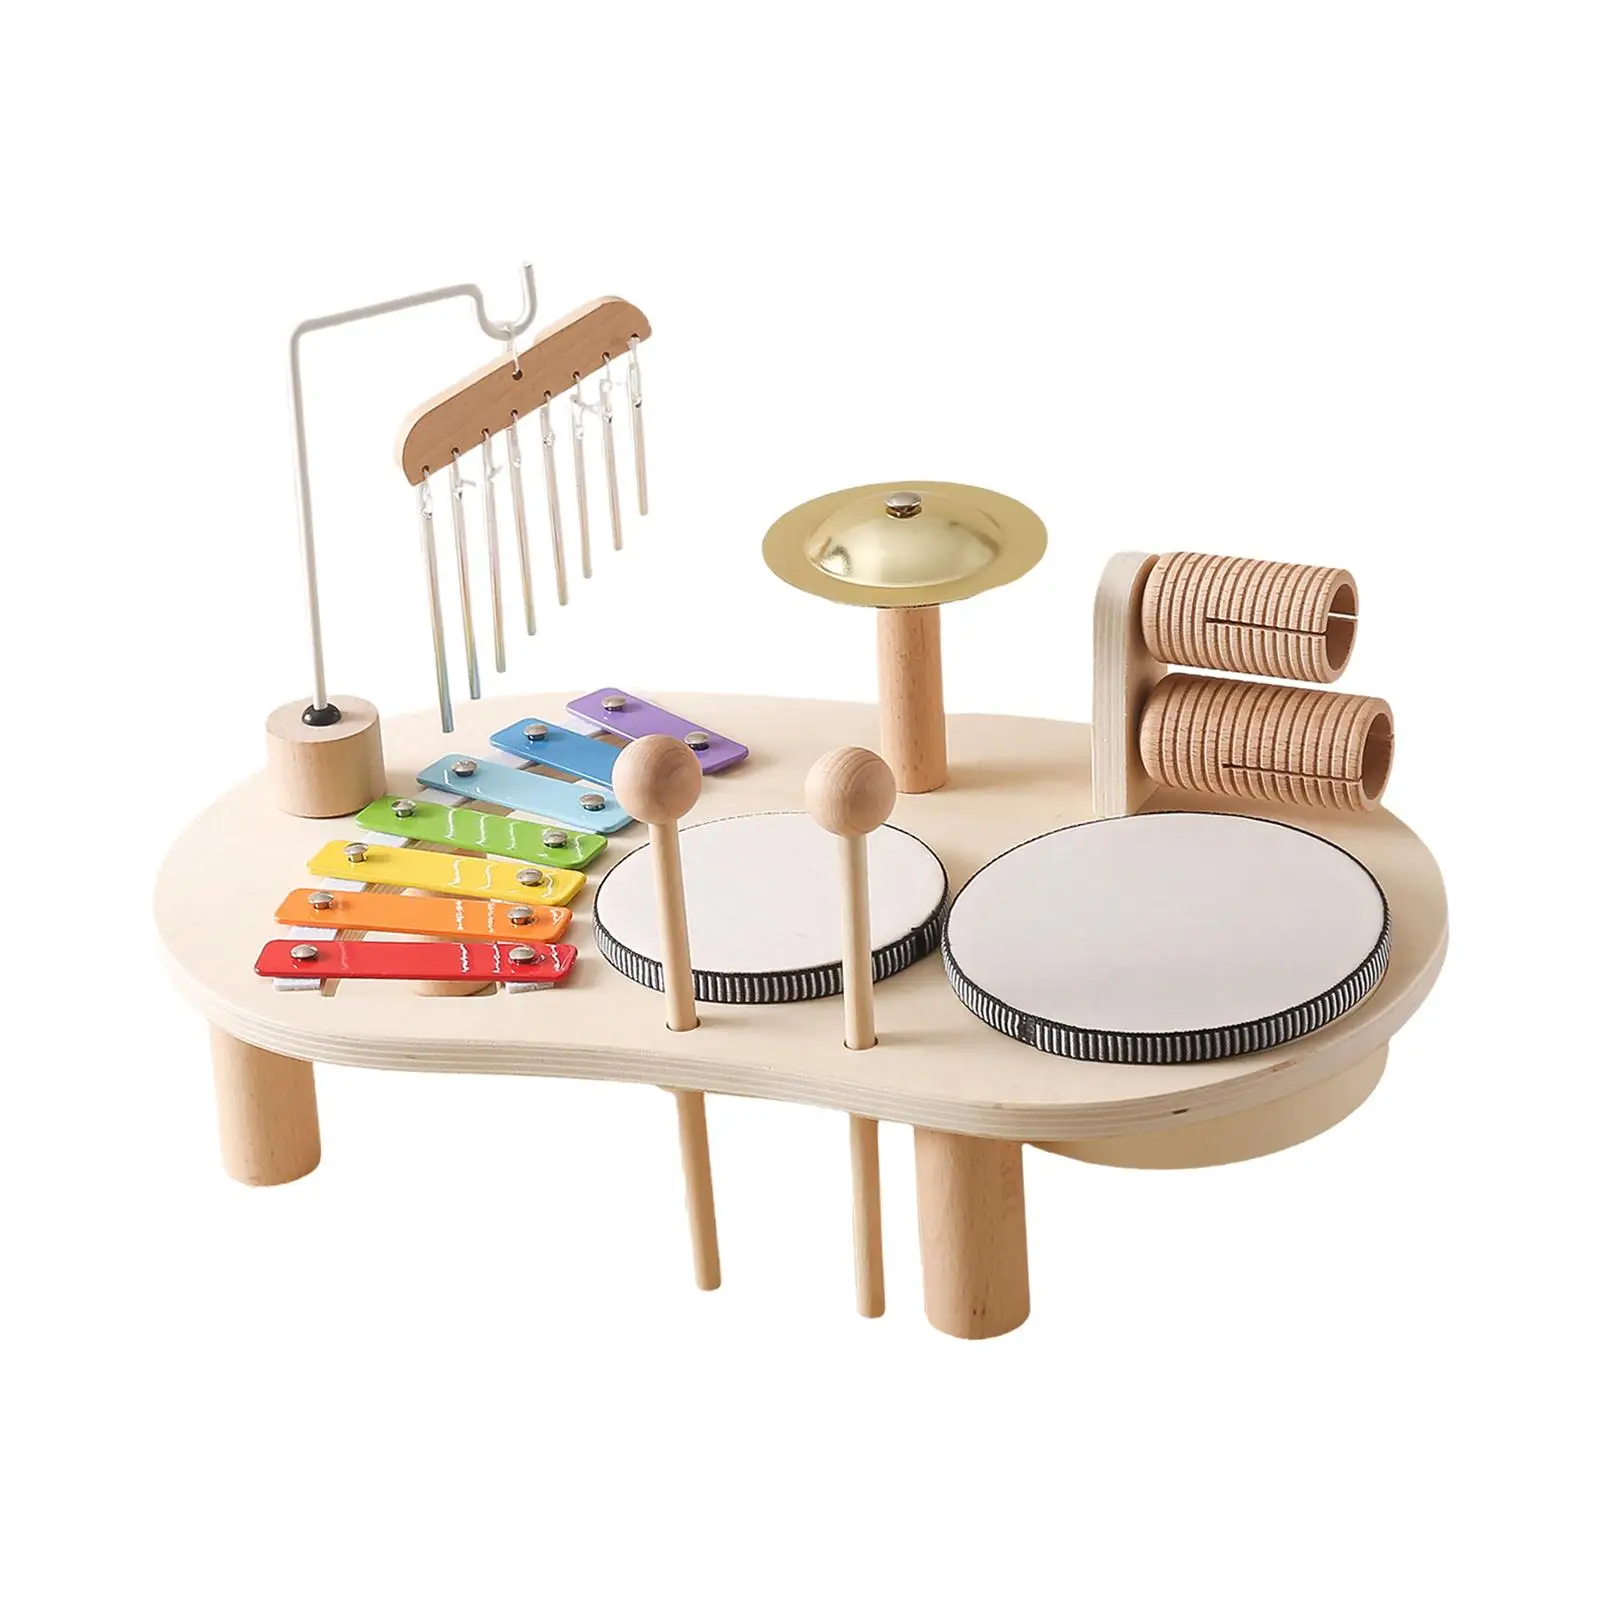 Xylophone Drum Set Creativity Music Educational Toy Montessori Musical Instruments Set for Kids Boy Girl Children Toddlers Gifts